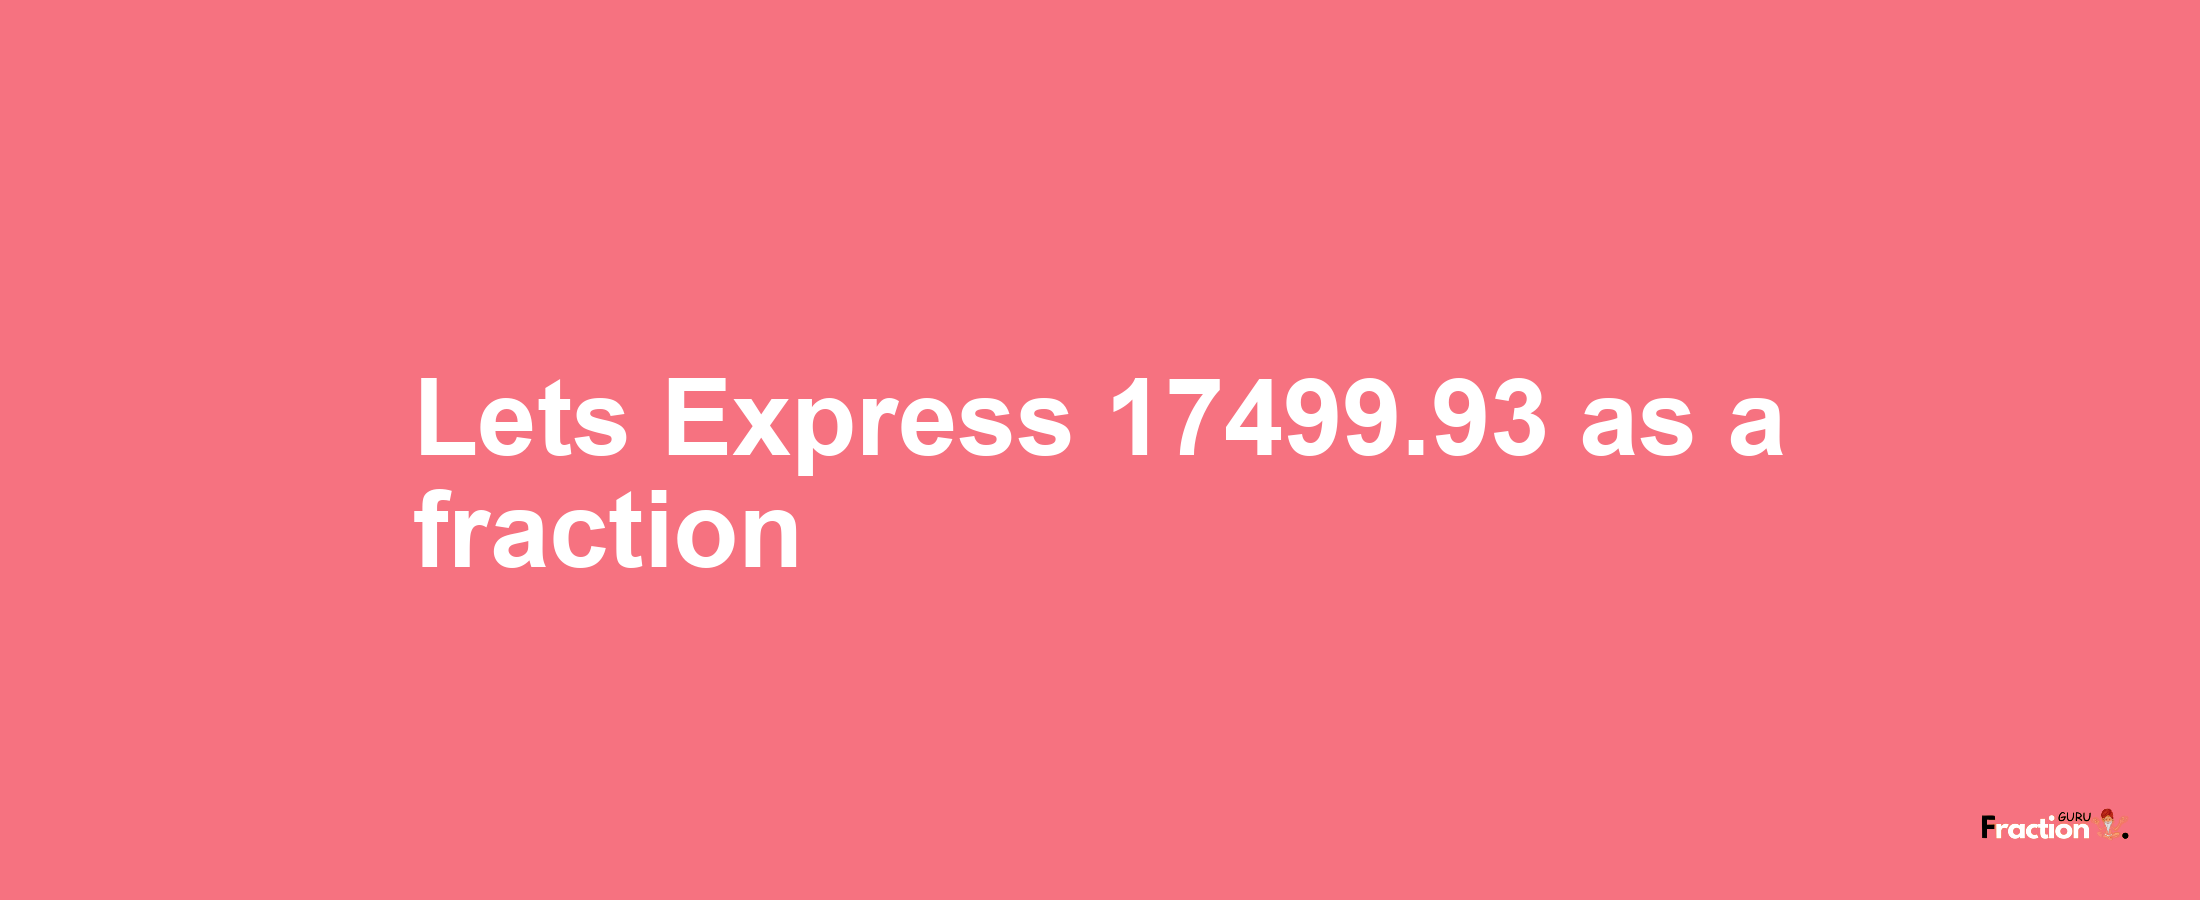 Lets Express 17499.93 as afraction